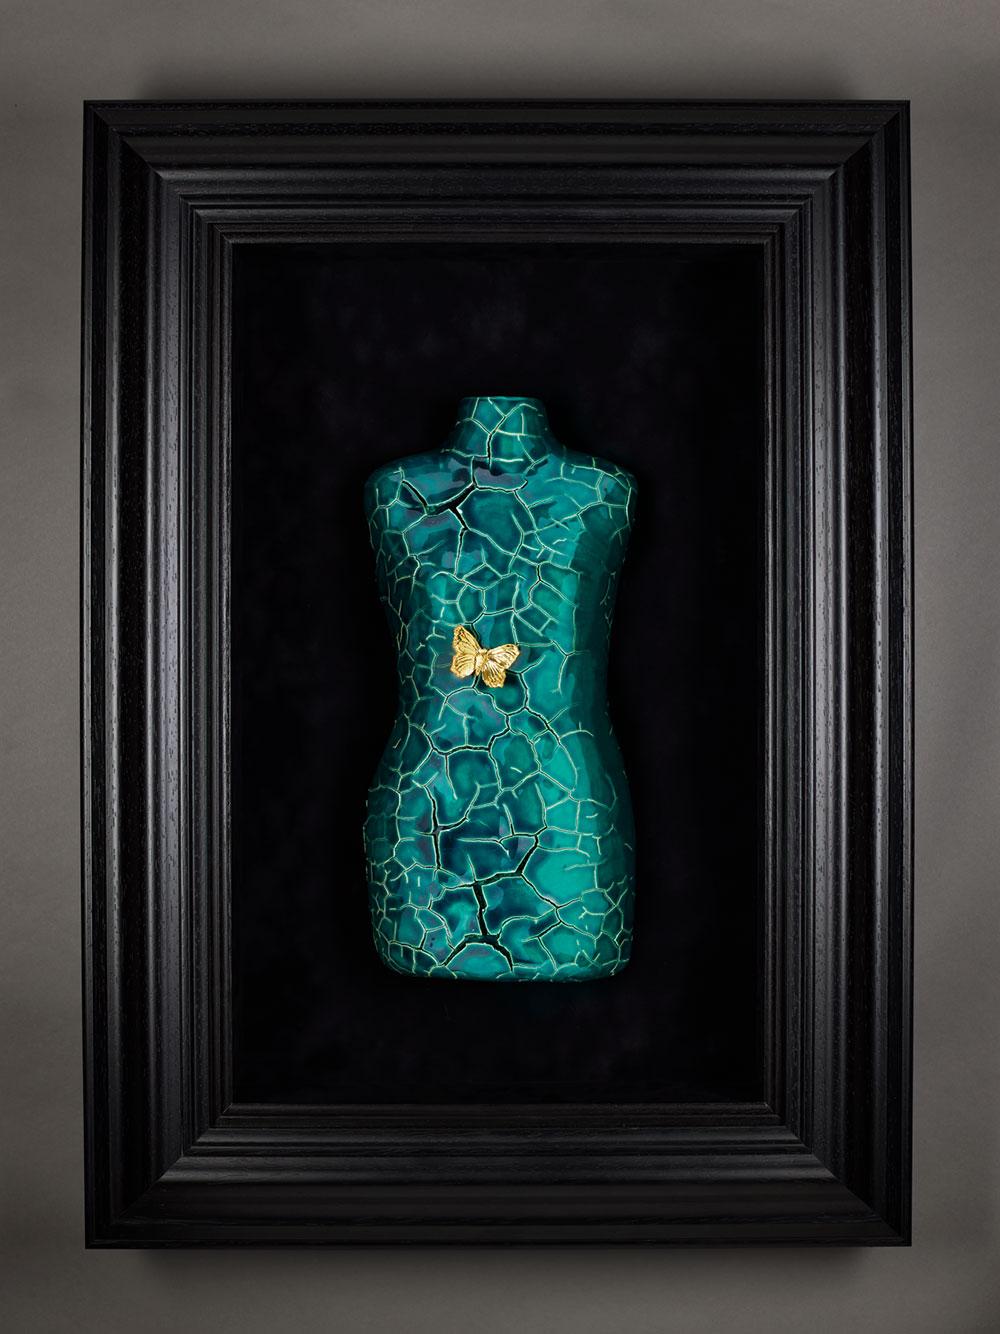 Azure I - Wall Sculpture, Ceramic, handcrafted, unique, fashion, enviromental - Mixed Media Art by Oliver Tanay